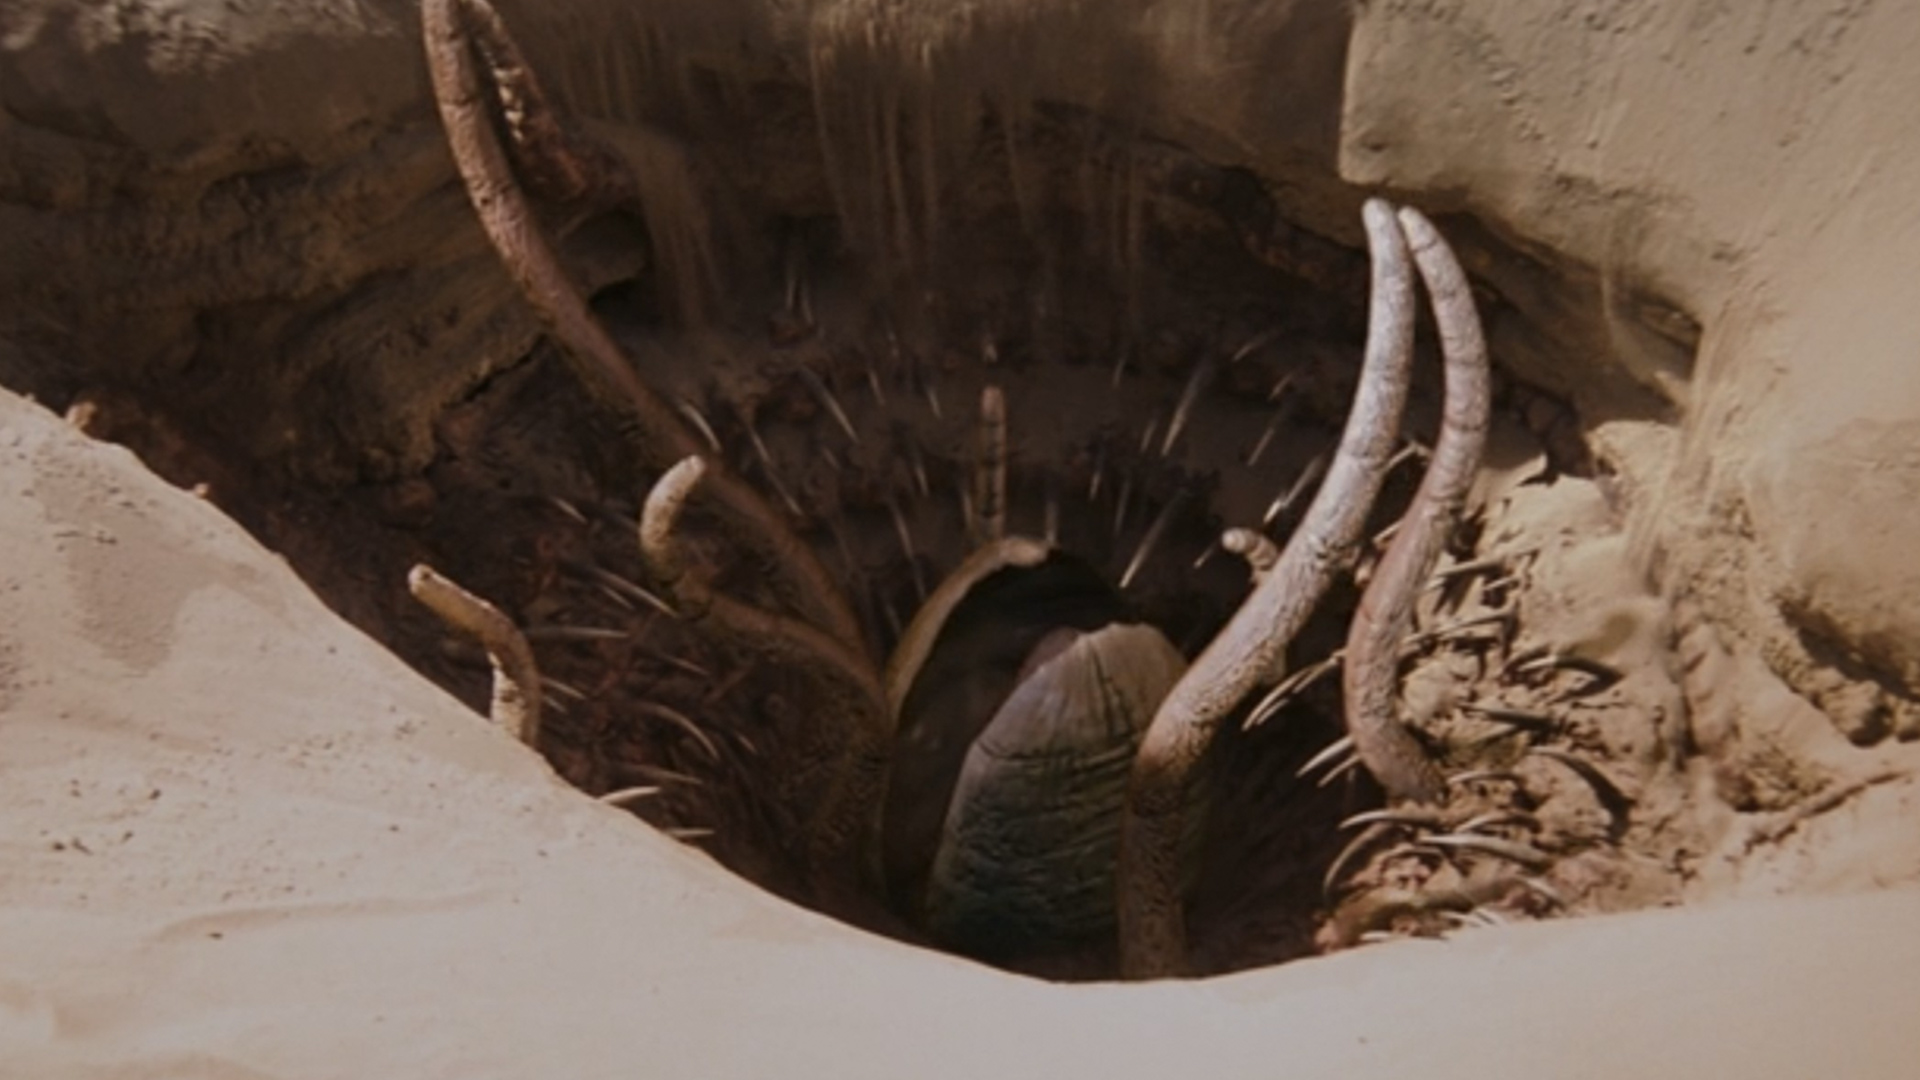 The sarlacc pit